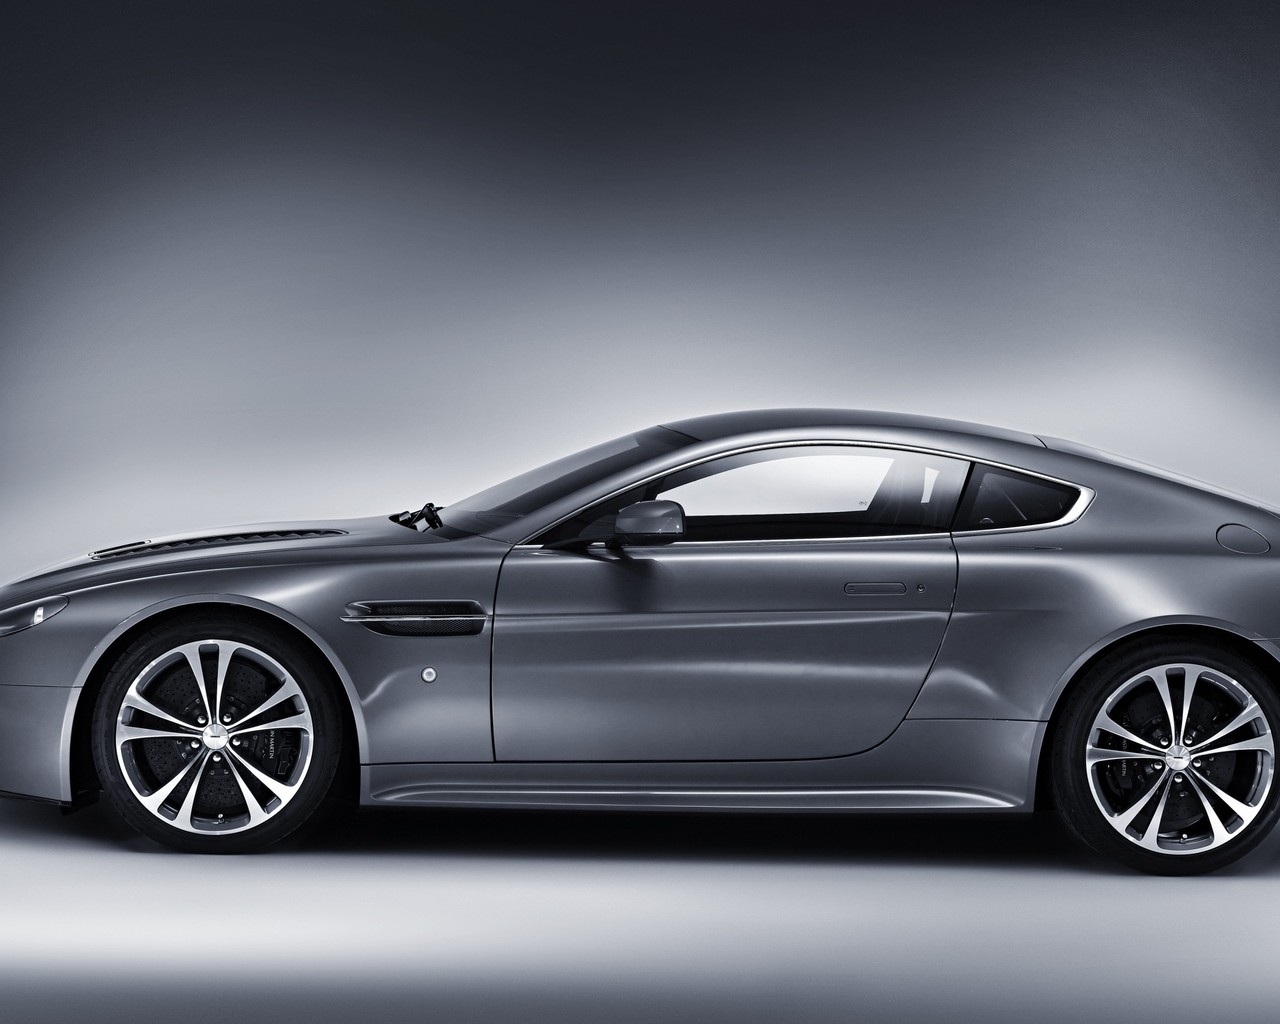 Aston Martin V12 Vantage Front View for 1280 x 1024 resolution